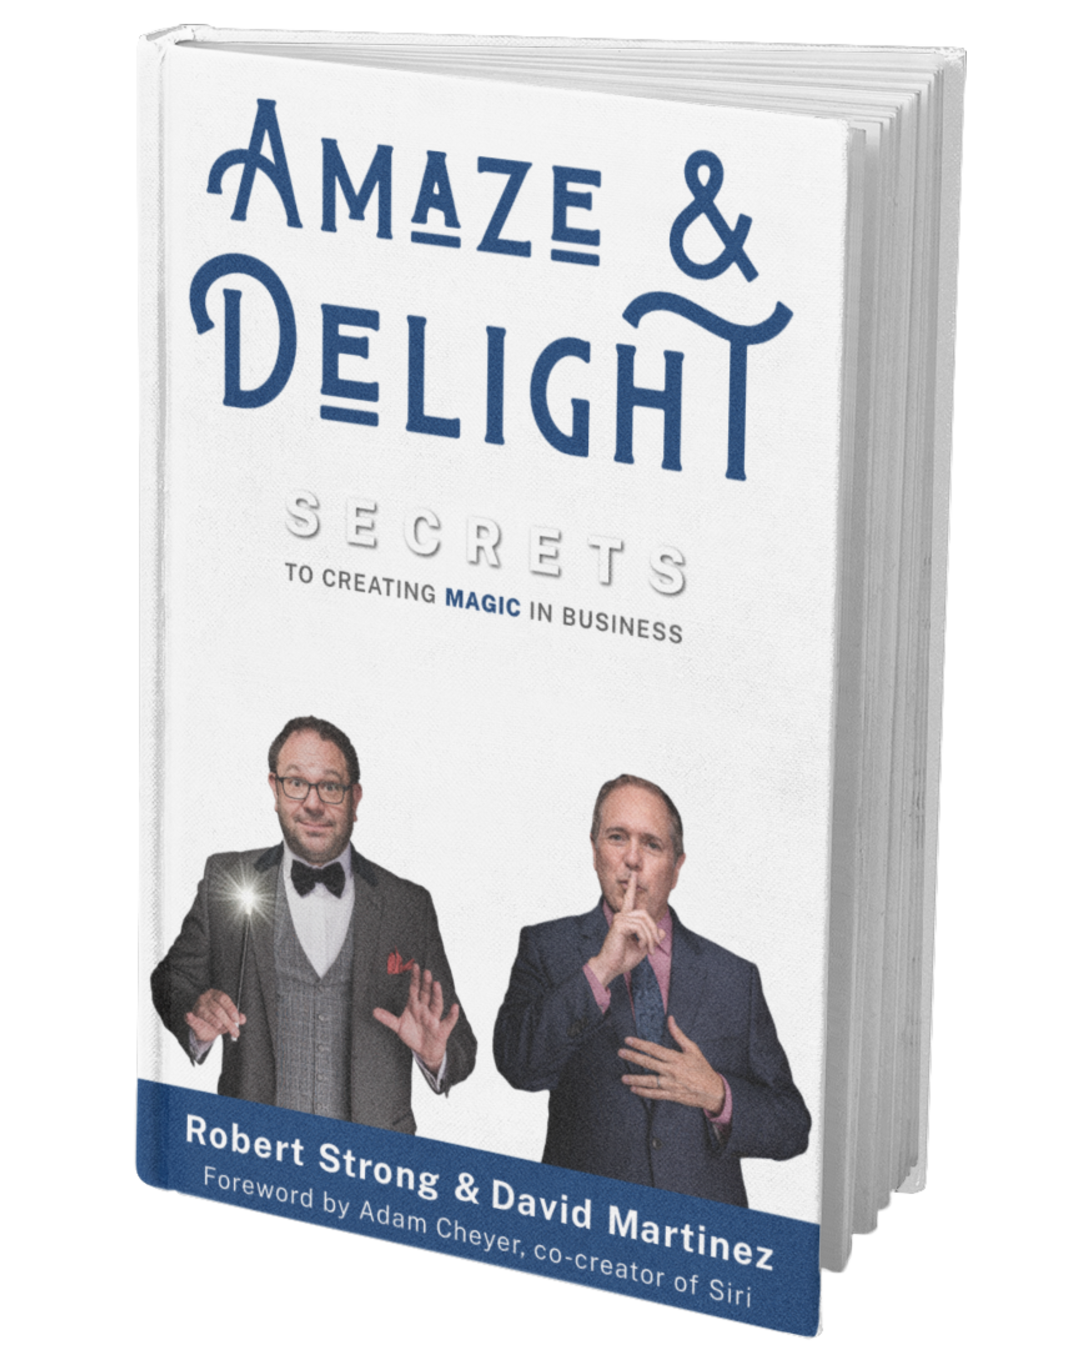 Amaze & Delight: A book by San Francisco Bay Area corporate magician David Martinez and Robert Strong